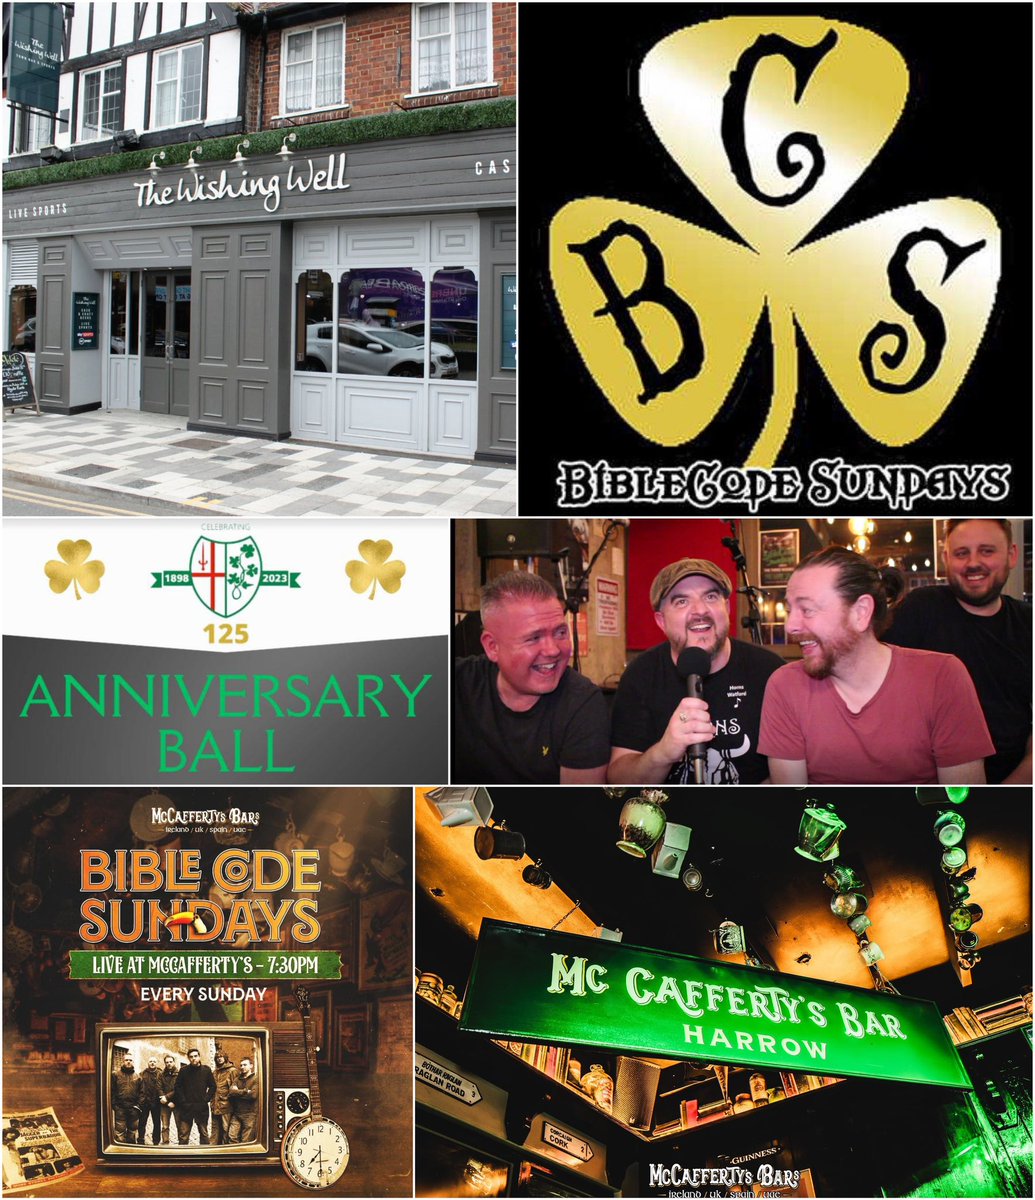 ☀️ This weekend’s gig guide is as follows folks: Fri 10 May - @GeeseRugby 125th Anniversay Ball 9-11pm - ticket only event! 🏉☘️ Sat 11 May - The Wishing Well, Hayes 9:30-11:30pm! 🍀 Sun 12 May - McCaffertys, North Harrow 7:30-9:30pm - BCS 4 piece! 🥁🪗🎸